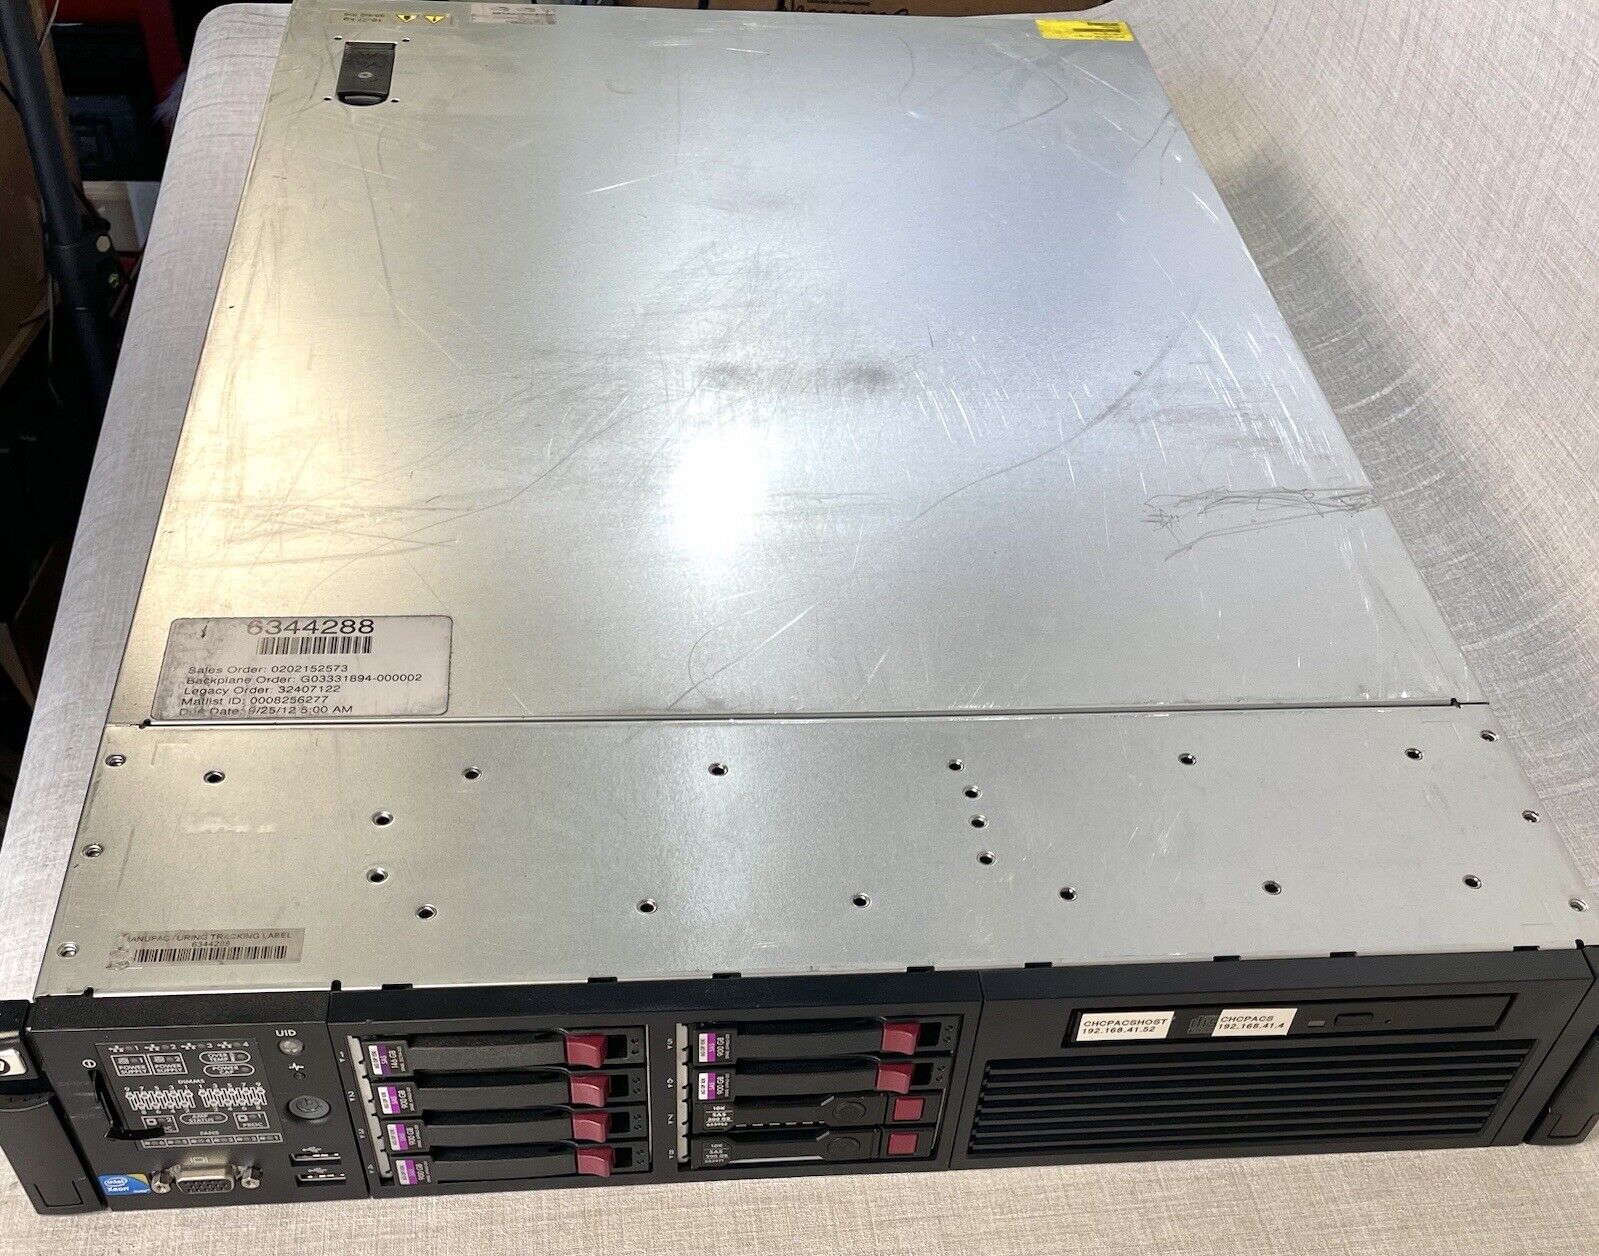 HP Proliant dl380 G7 Server Intel Xeon With Hard Drives